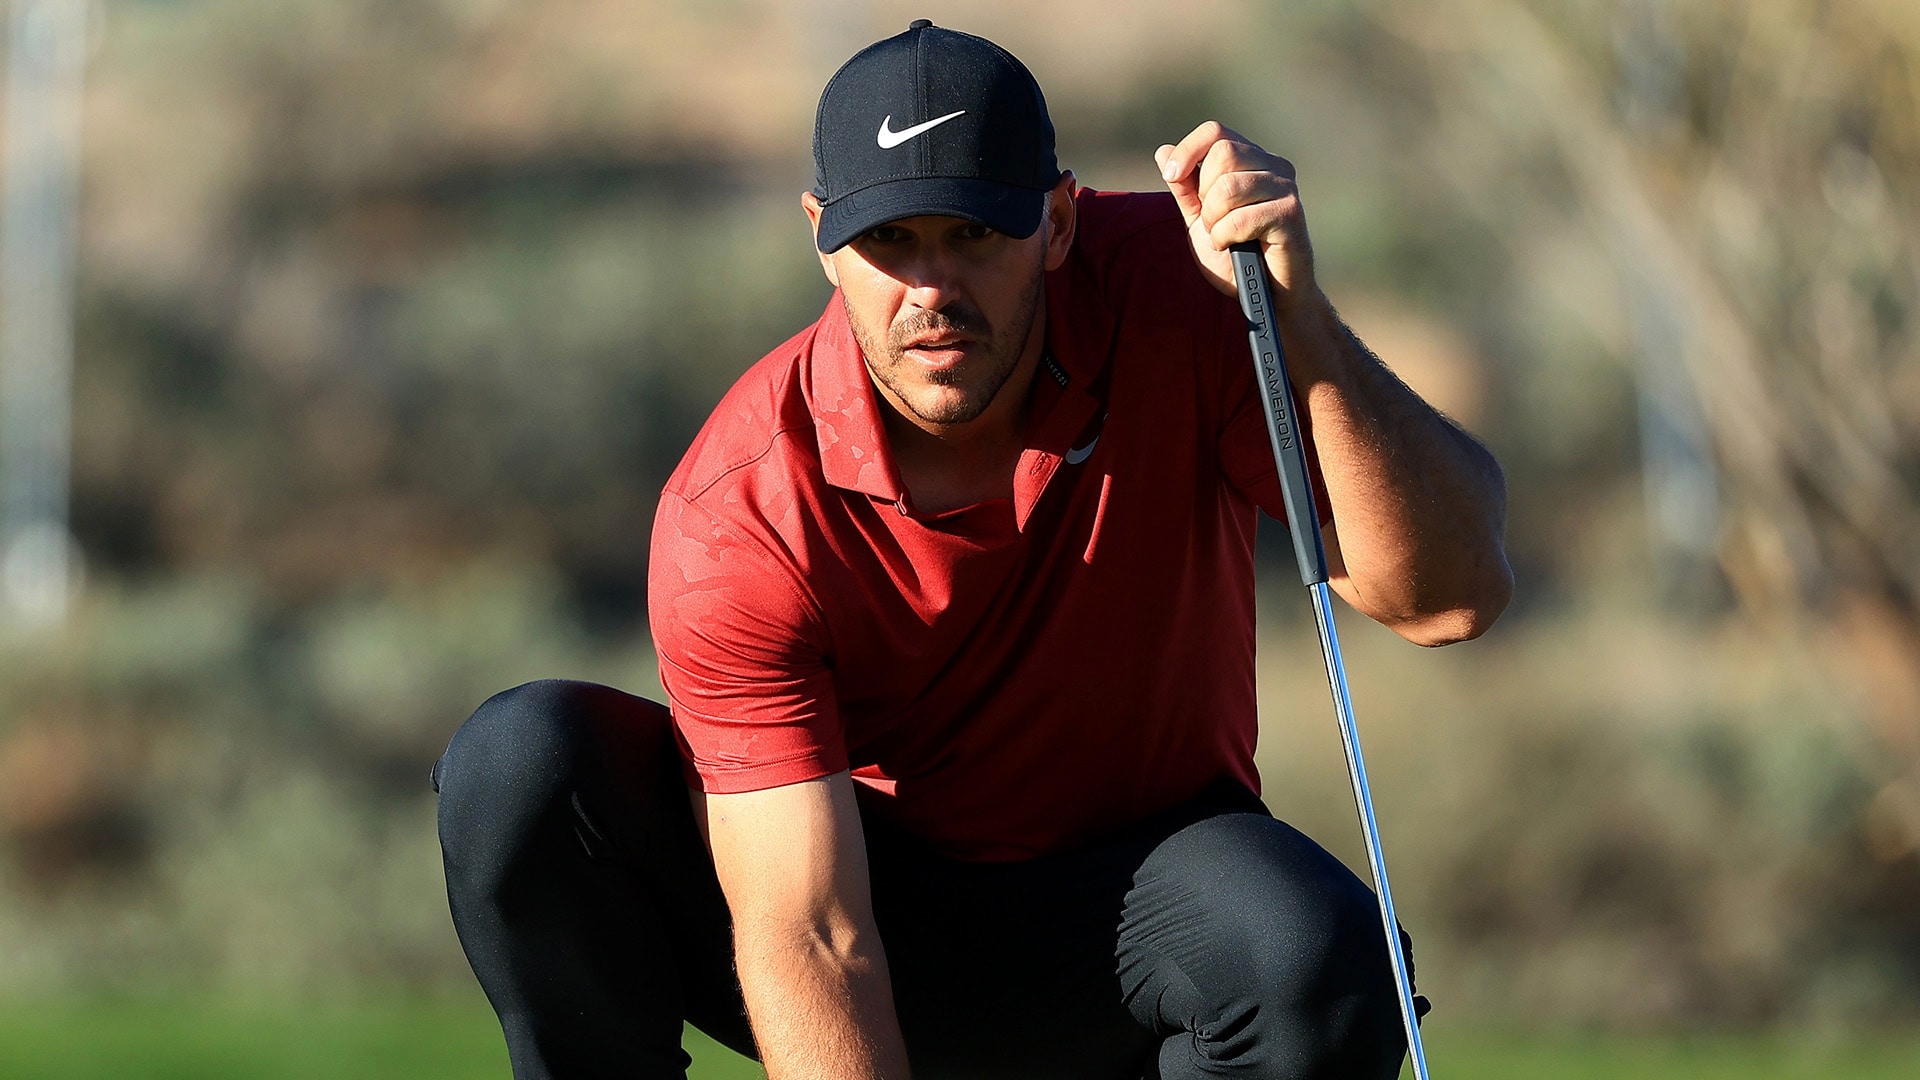 Brooks Koepka embarrassed by world ranking, but takes stride in Rd. 1 of WM Phoenix Open